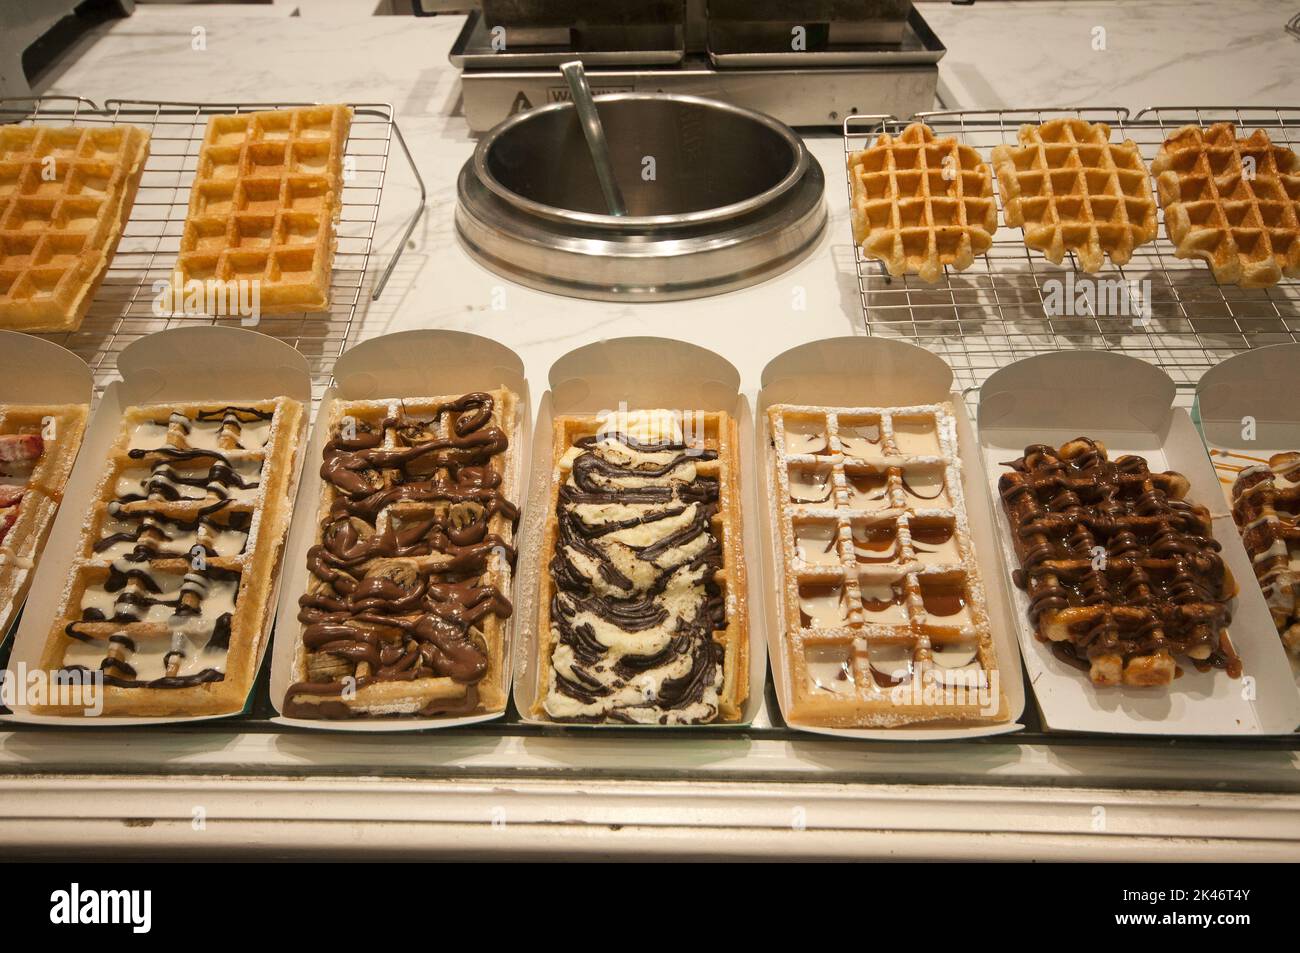 Gaufres (typical belgian waffles) for sale in Brussels, Belgium Stock Photo